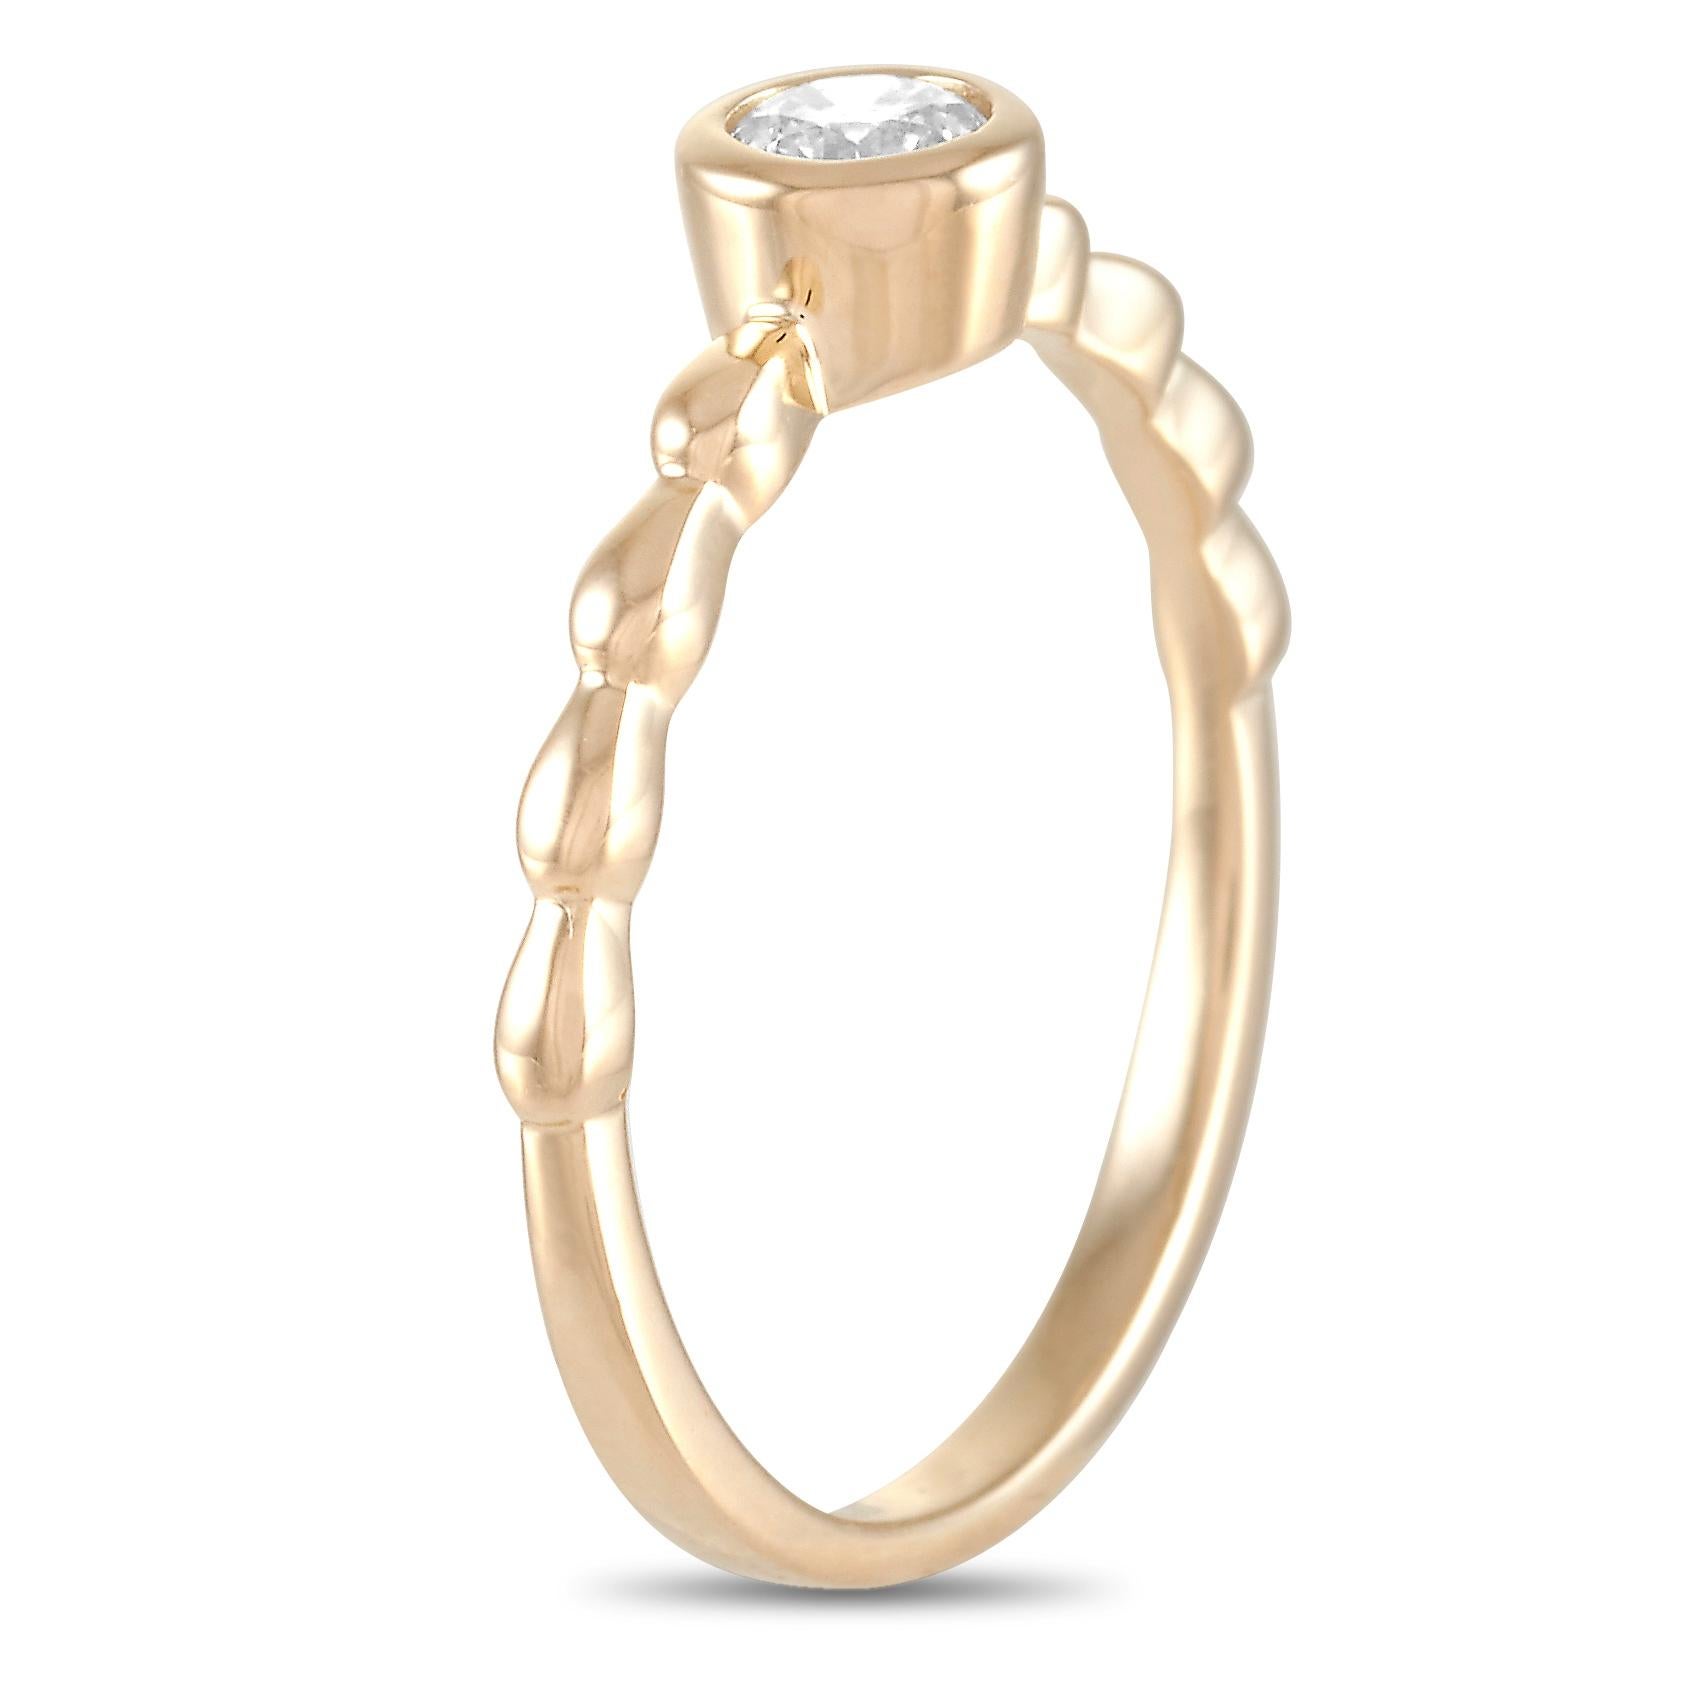 This LB Exclusive ring is made of 14K yellow gold and embellished with a 0.25 ct diamond stone. The ring weighs 1.9 grams and boasts band thickness of 1 mm and top height of 3 mm, while top dimensions measure 5 by 5 mm.
 
 Offered in brand new